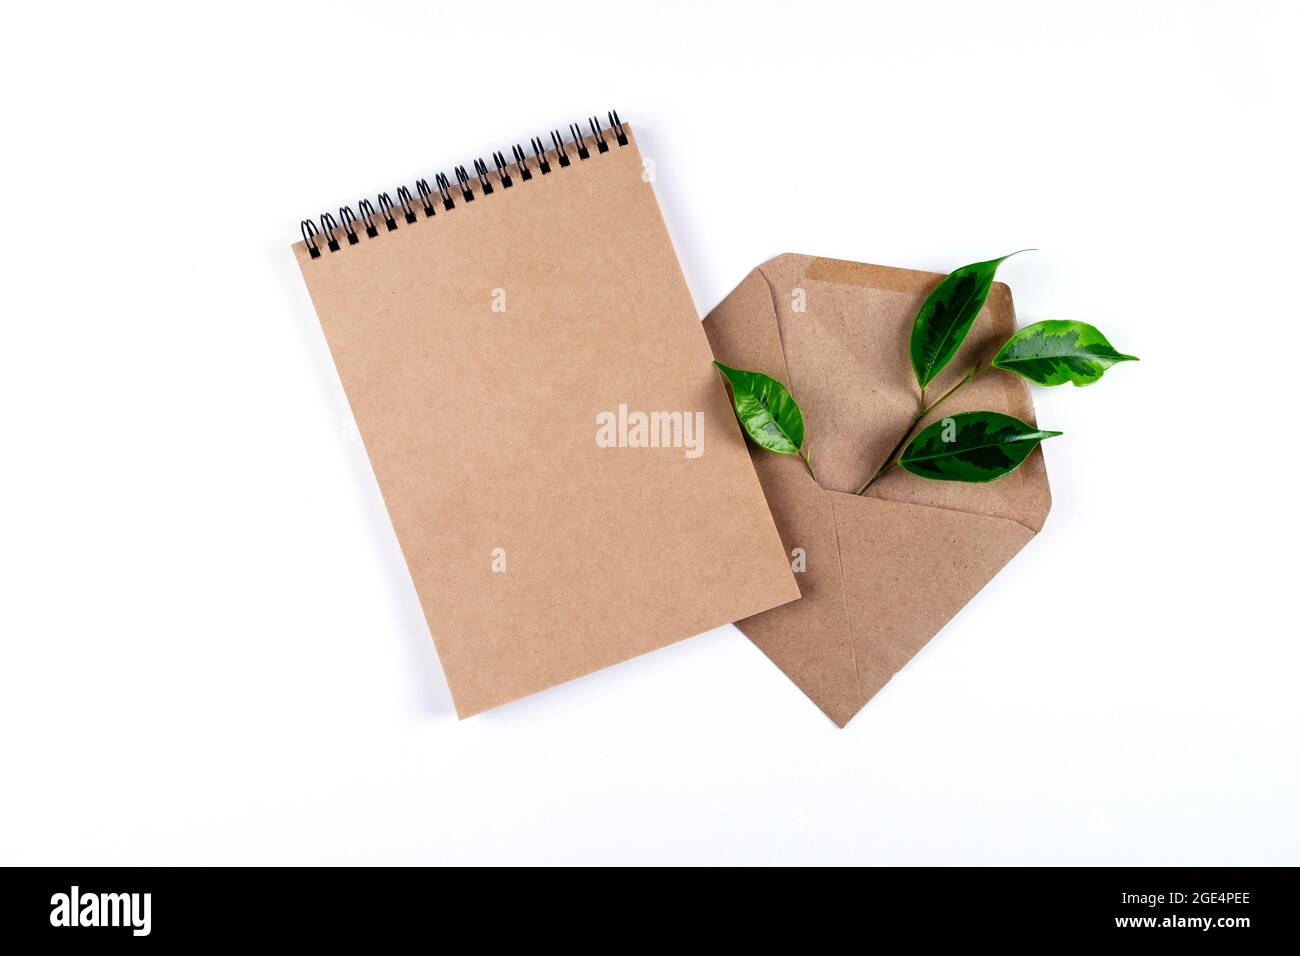 Notepad and an envelope made from recycled paper Stock Photo